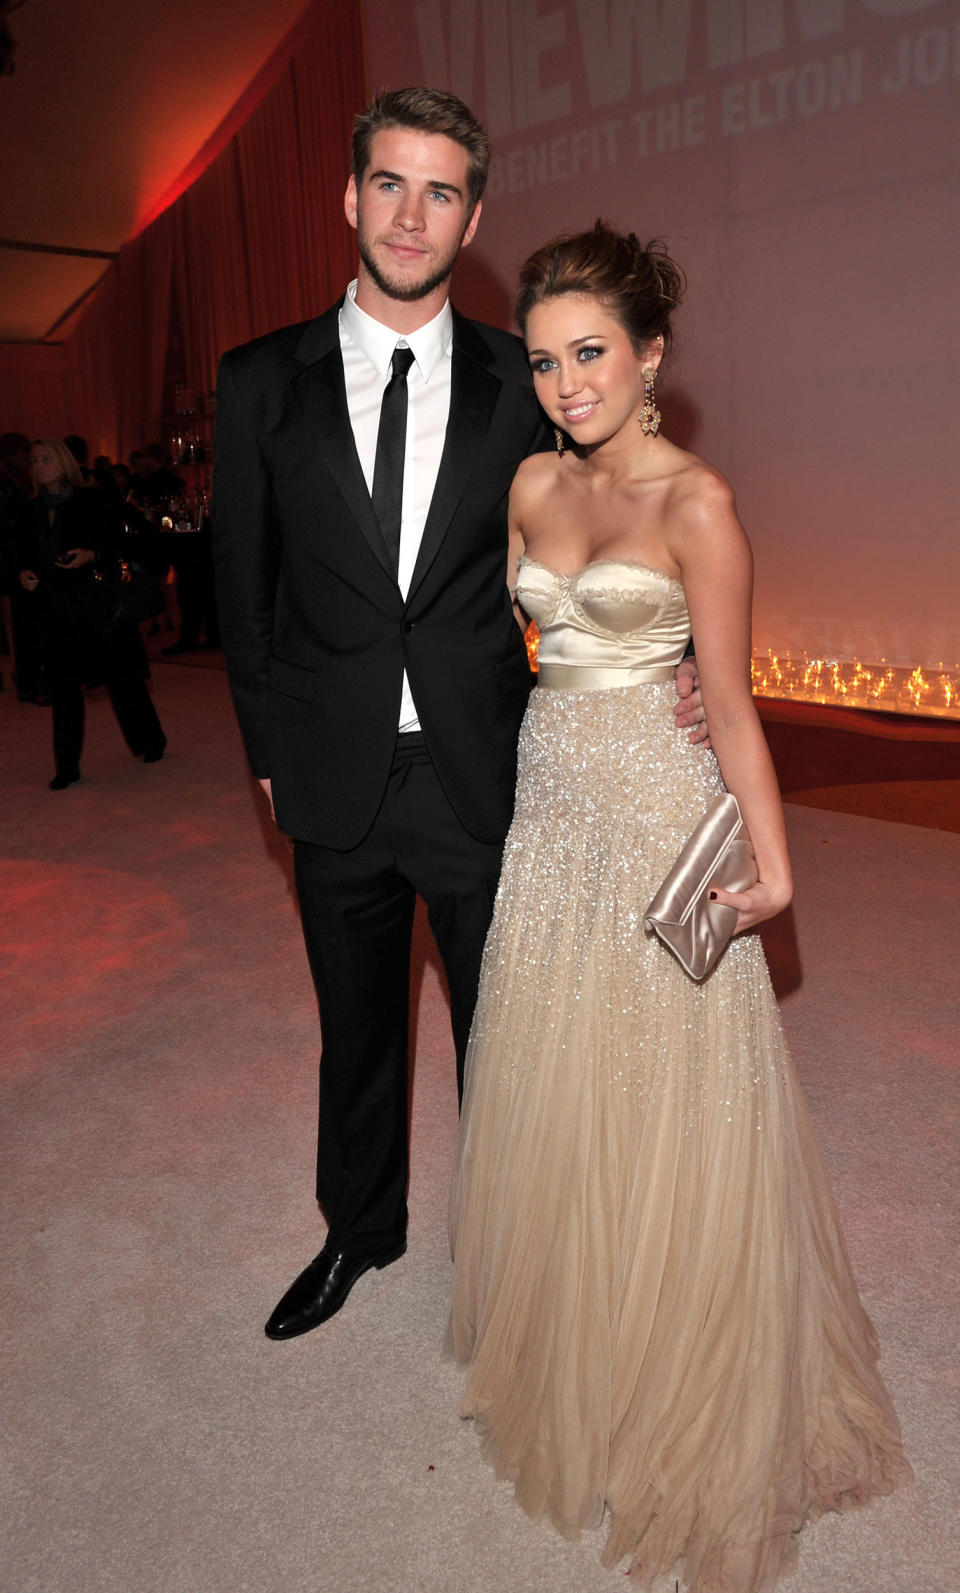 Liam Hemsworth and singer Miley Cyrus attend the 18th Annual Elton John AIDS Foundation Oscar party held at Pacific Design Center on March 7, 2010 in West Hollywood, California.   (Lester Cohen / WireImage)